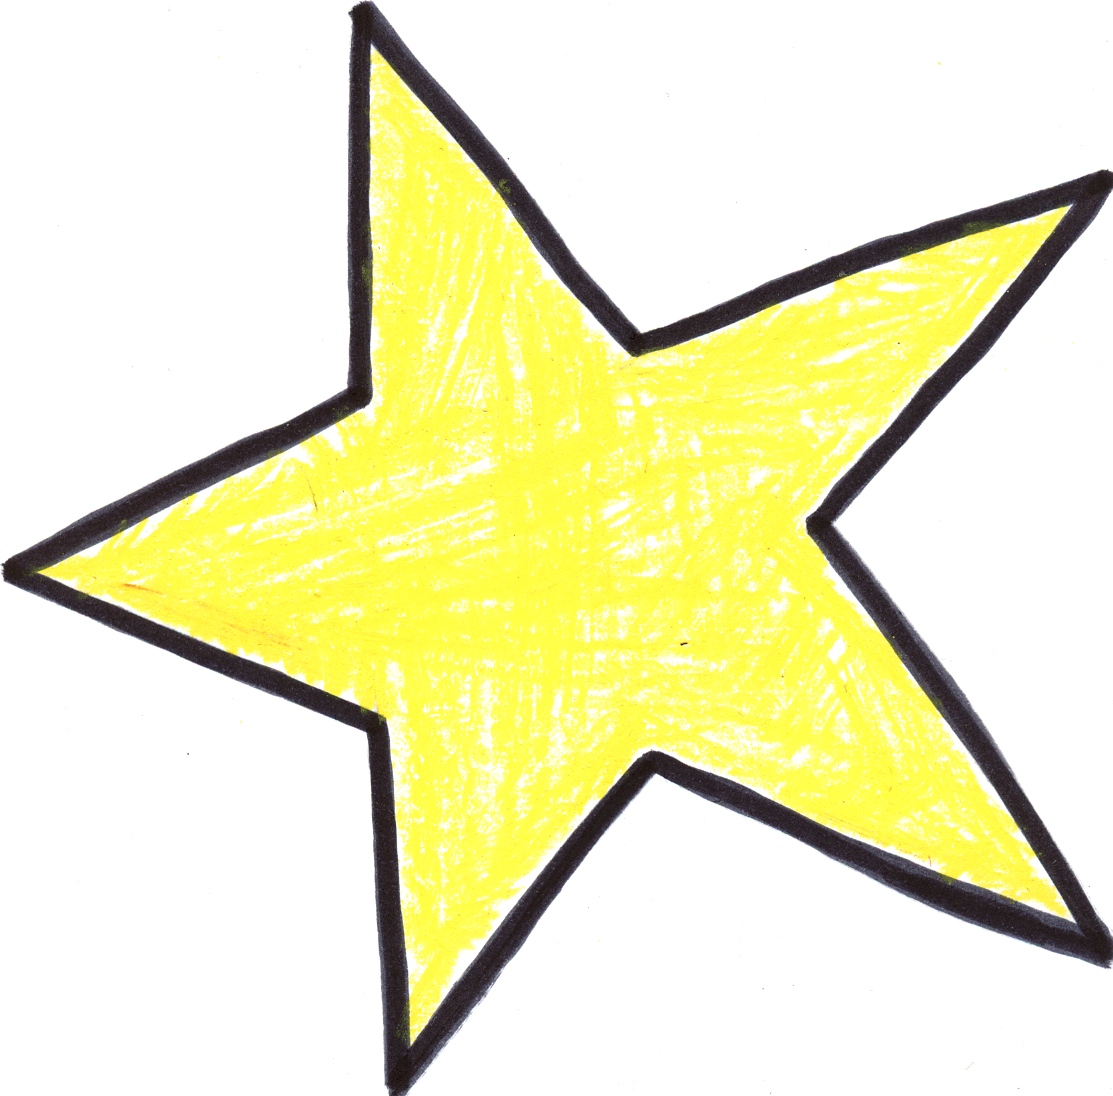 Star Clipart | Clipart Panda - Free Clipart Images